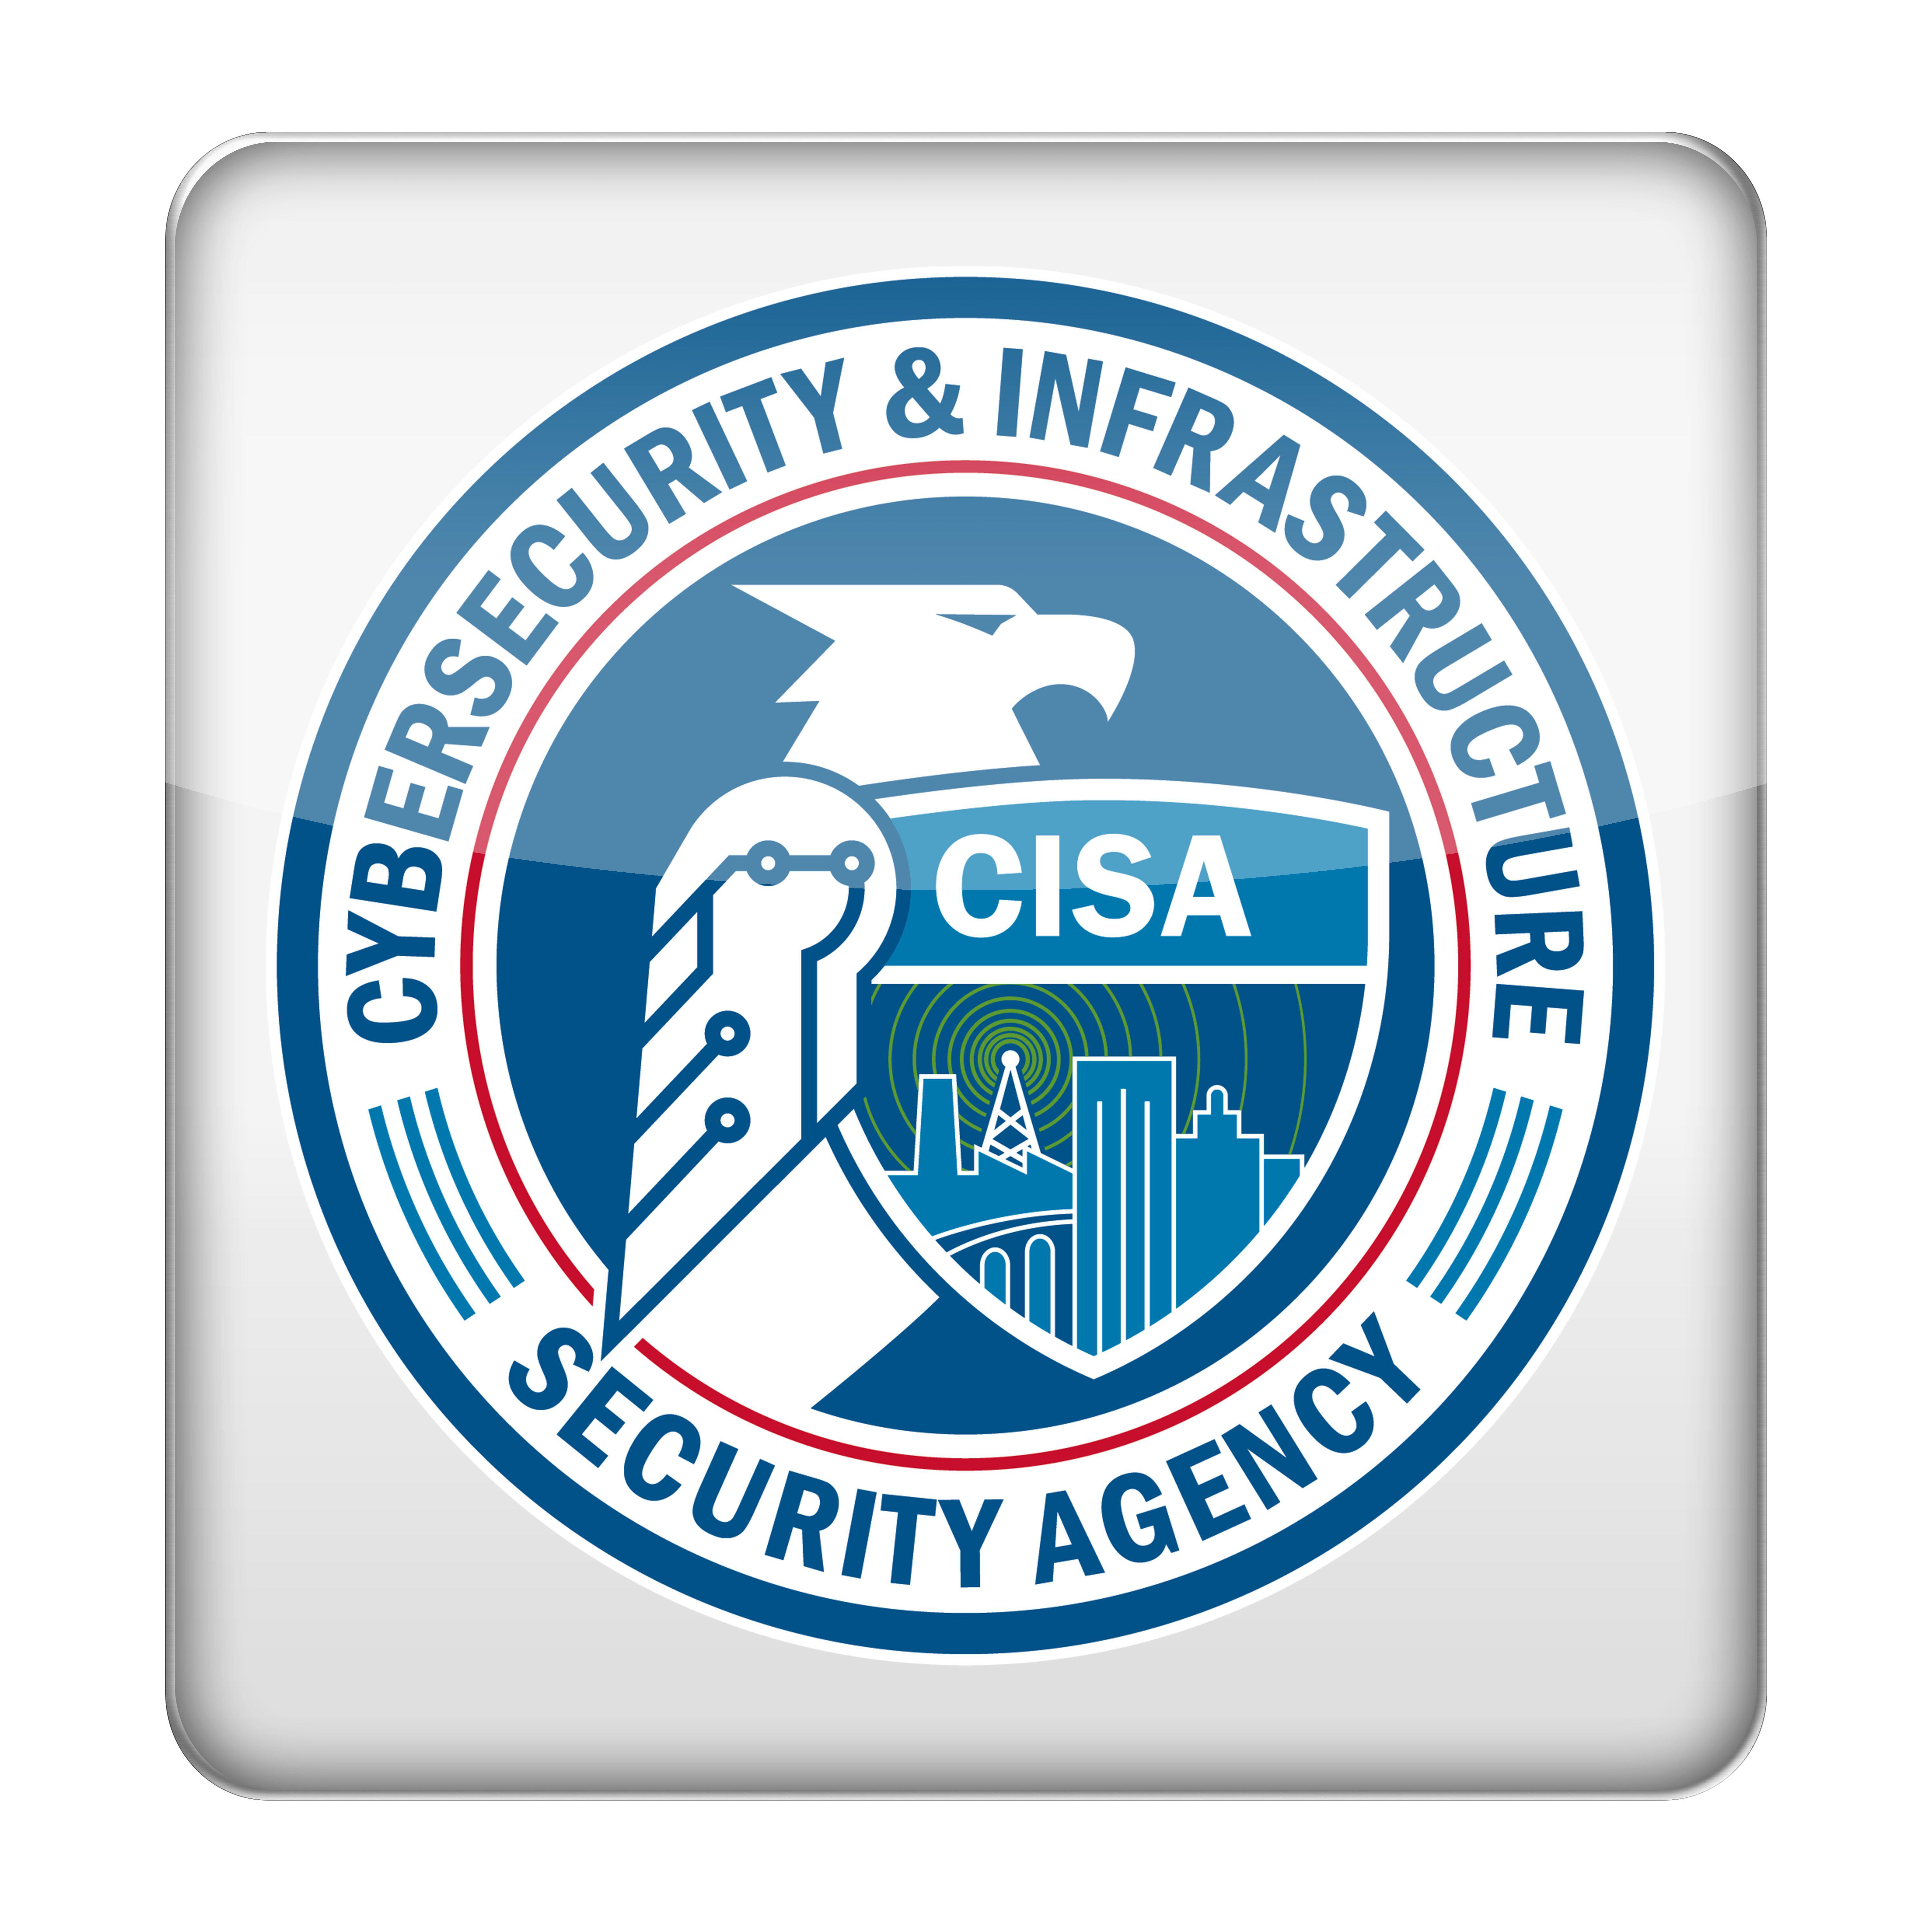 CISA's Road Map: Charting a Course for Trustworthy AI Development